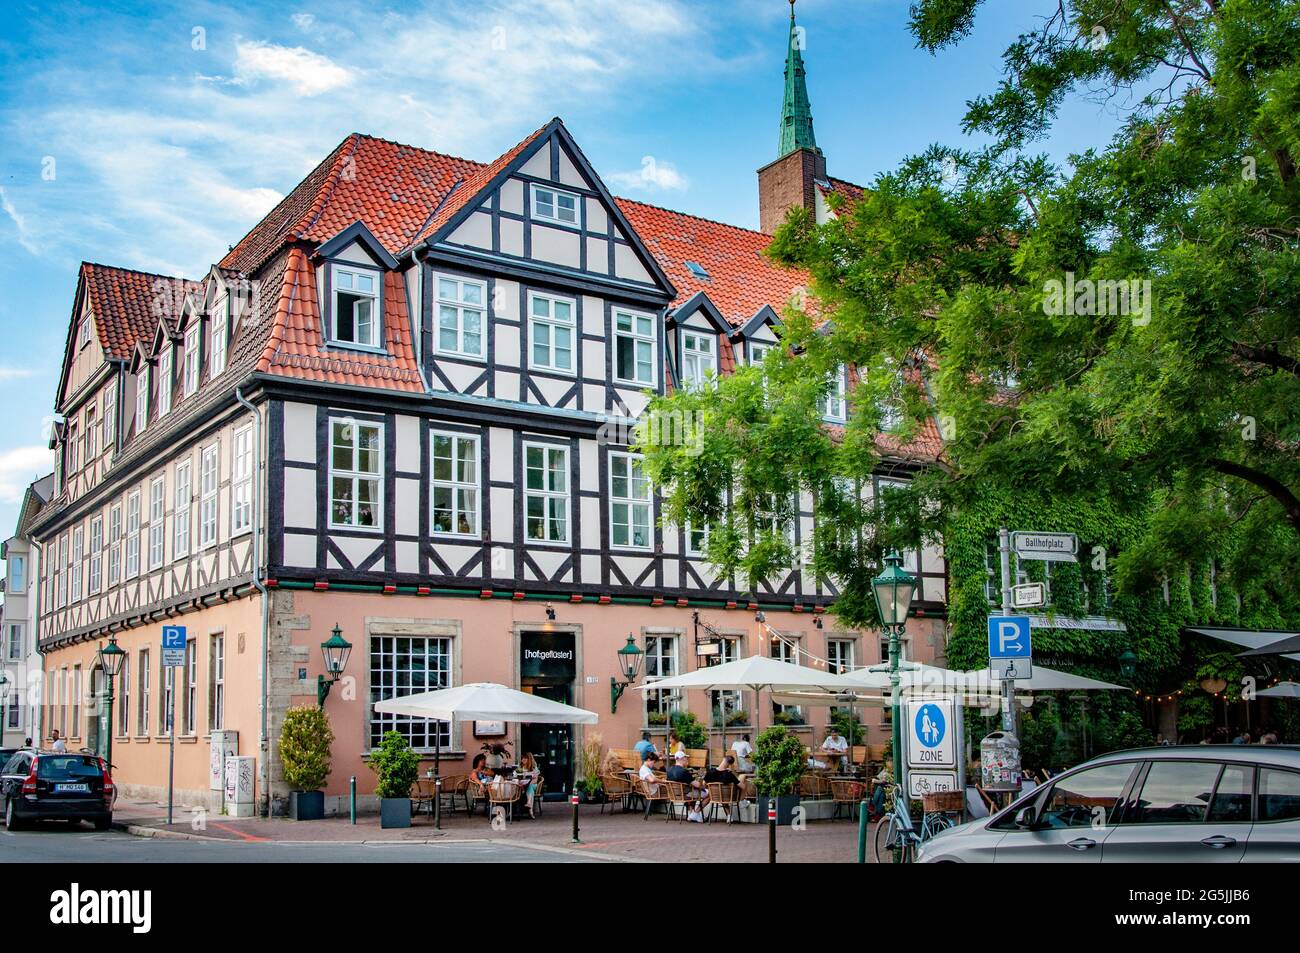 HANNOVER, GERMANY. JUNE 19, 2021. Beautiful view on street with buildings in fachwerk style, prussian wall. Stock Photo